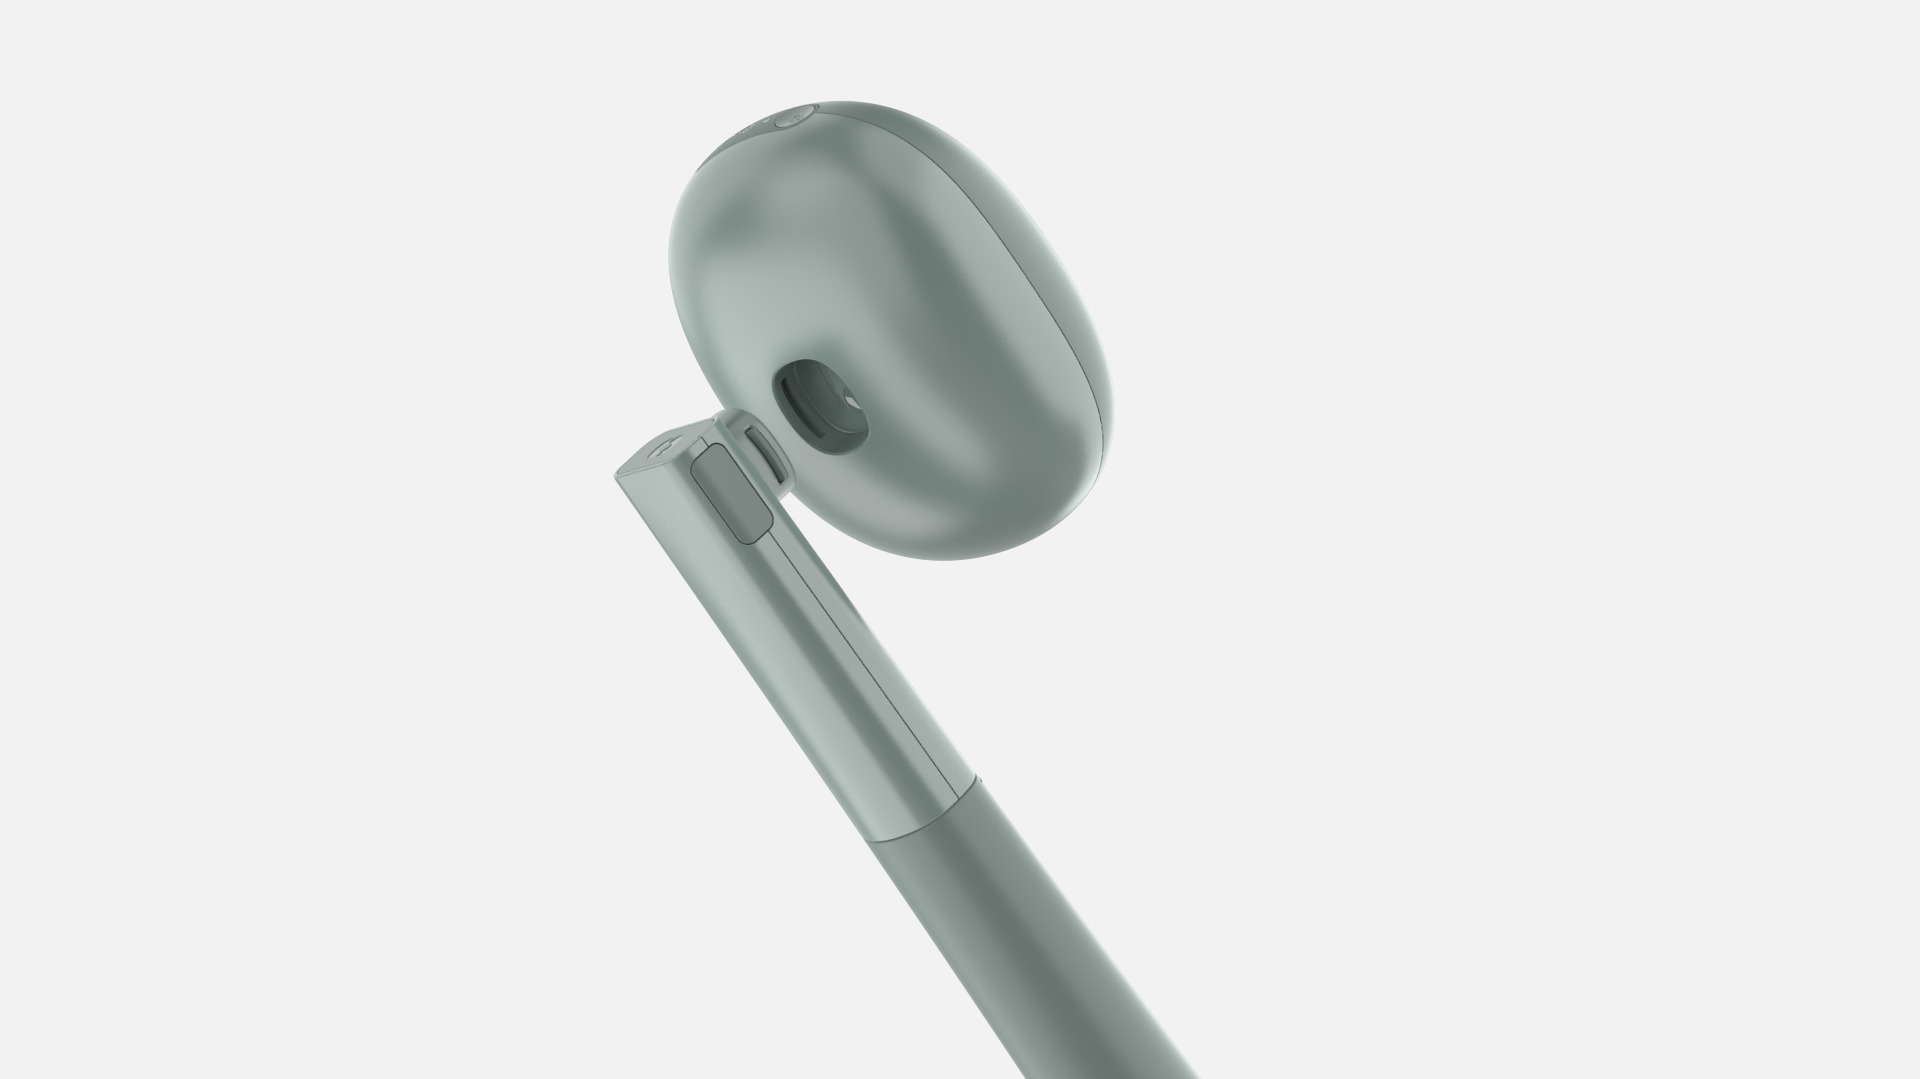 Render of the SkinSafe medical device handle developed by the industrial team at Simple Design Works